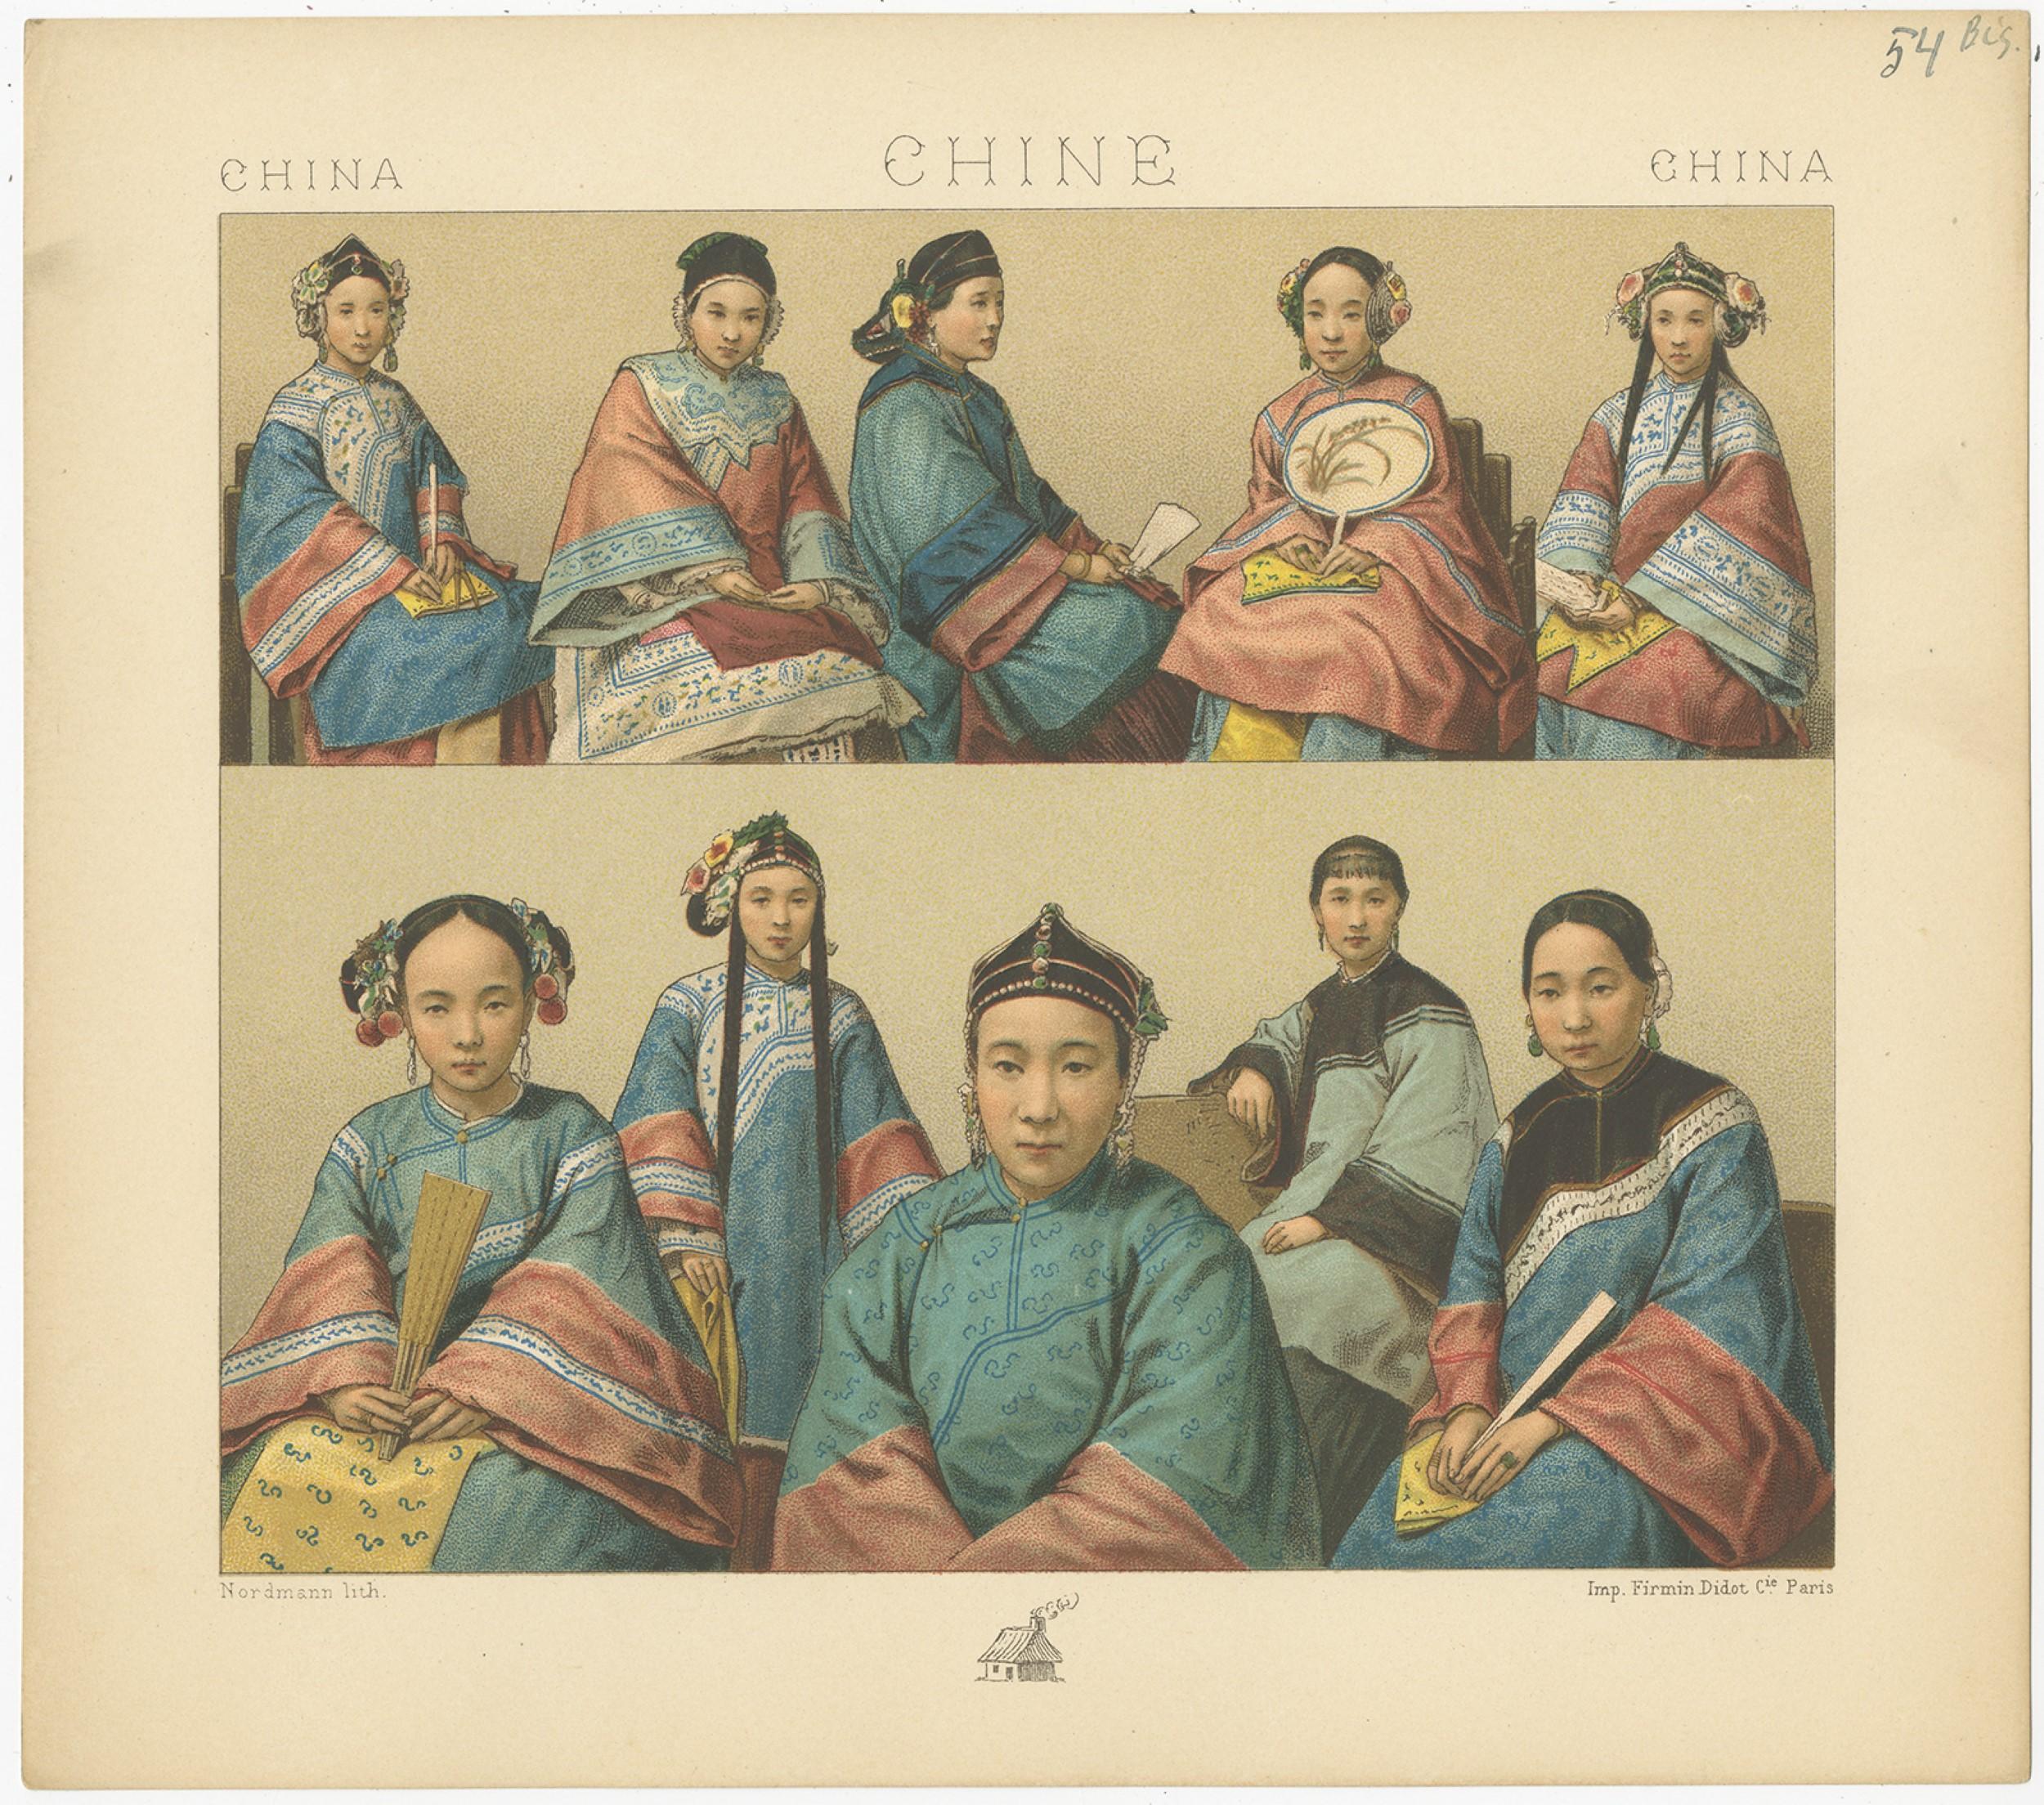 Antique print titled 'China - Chine - China'. Chromolithograph of Chinese costumes. This print originates from 'Le Costume Historique' by M.A. Racinet. Published, circa 1880.